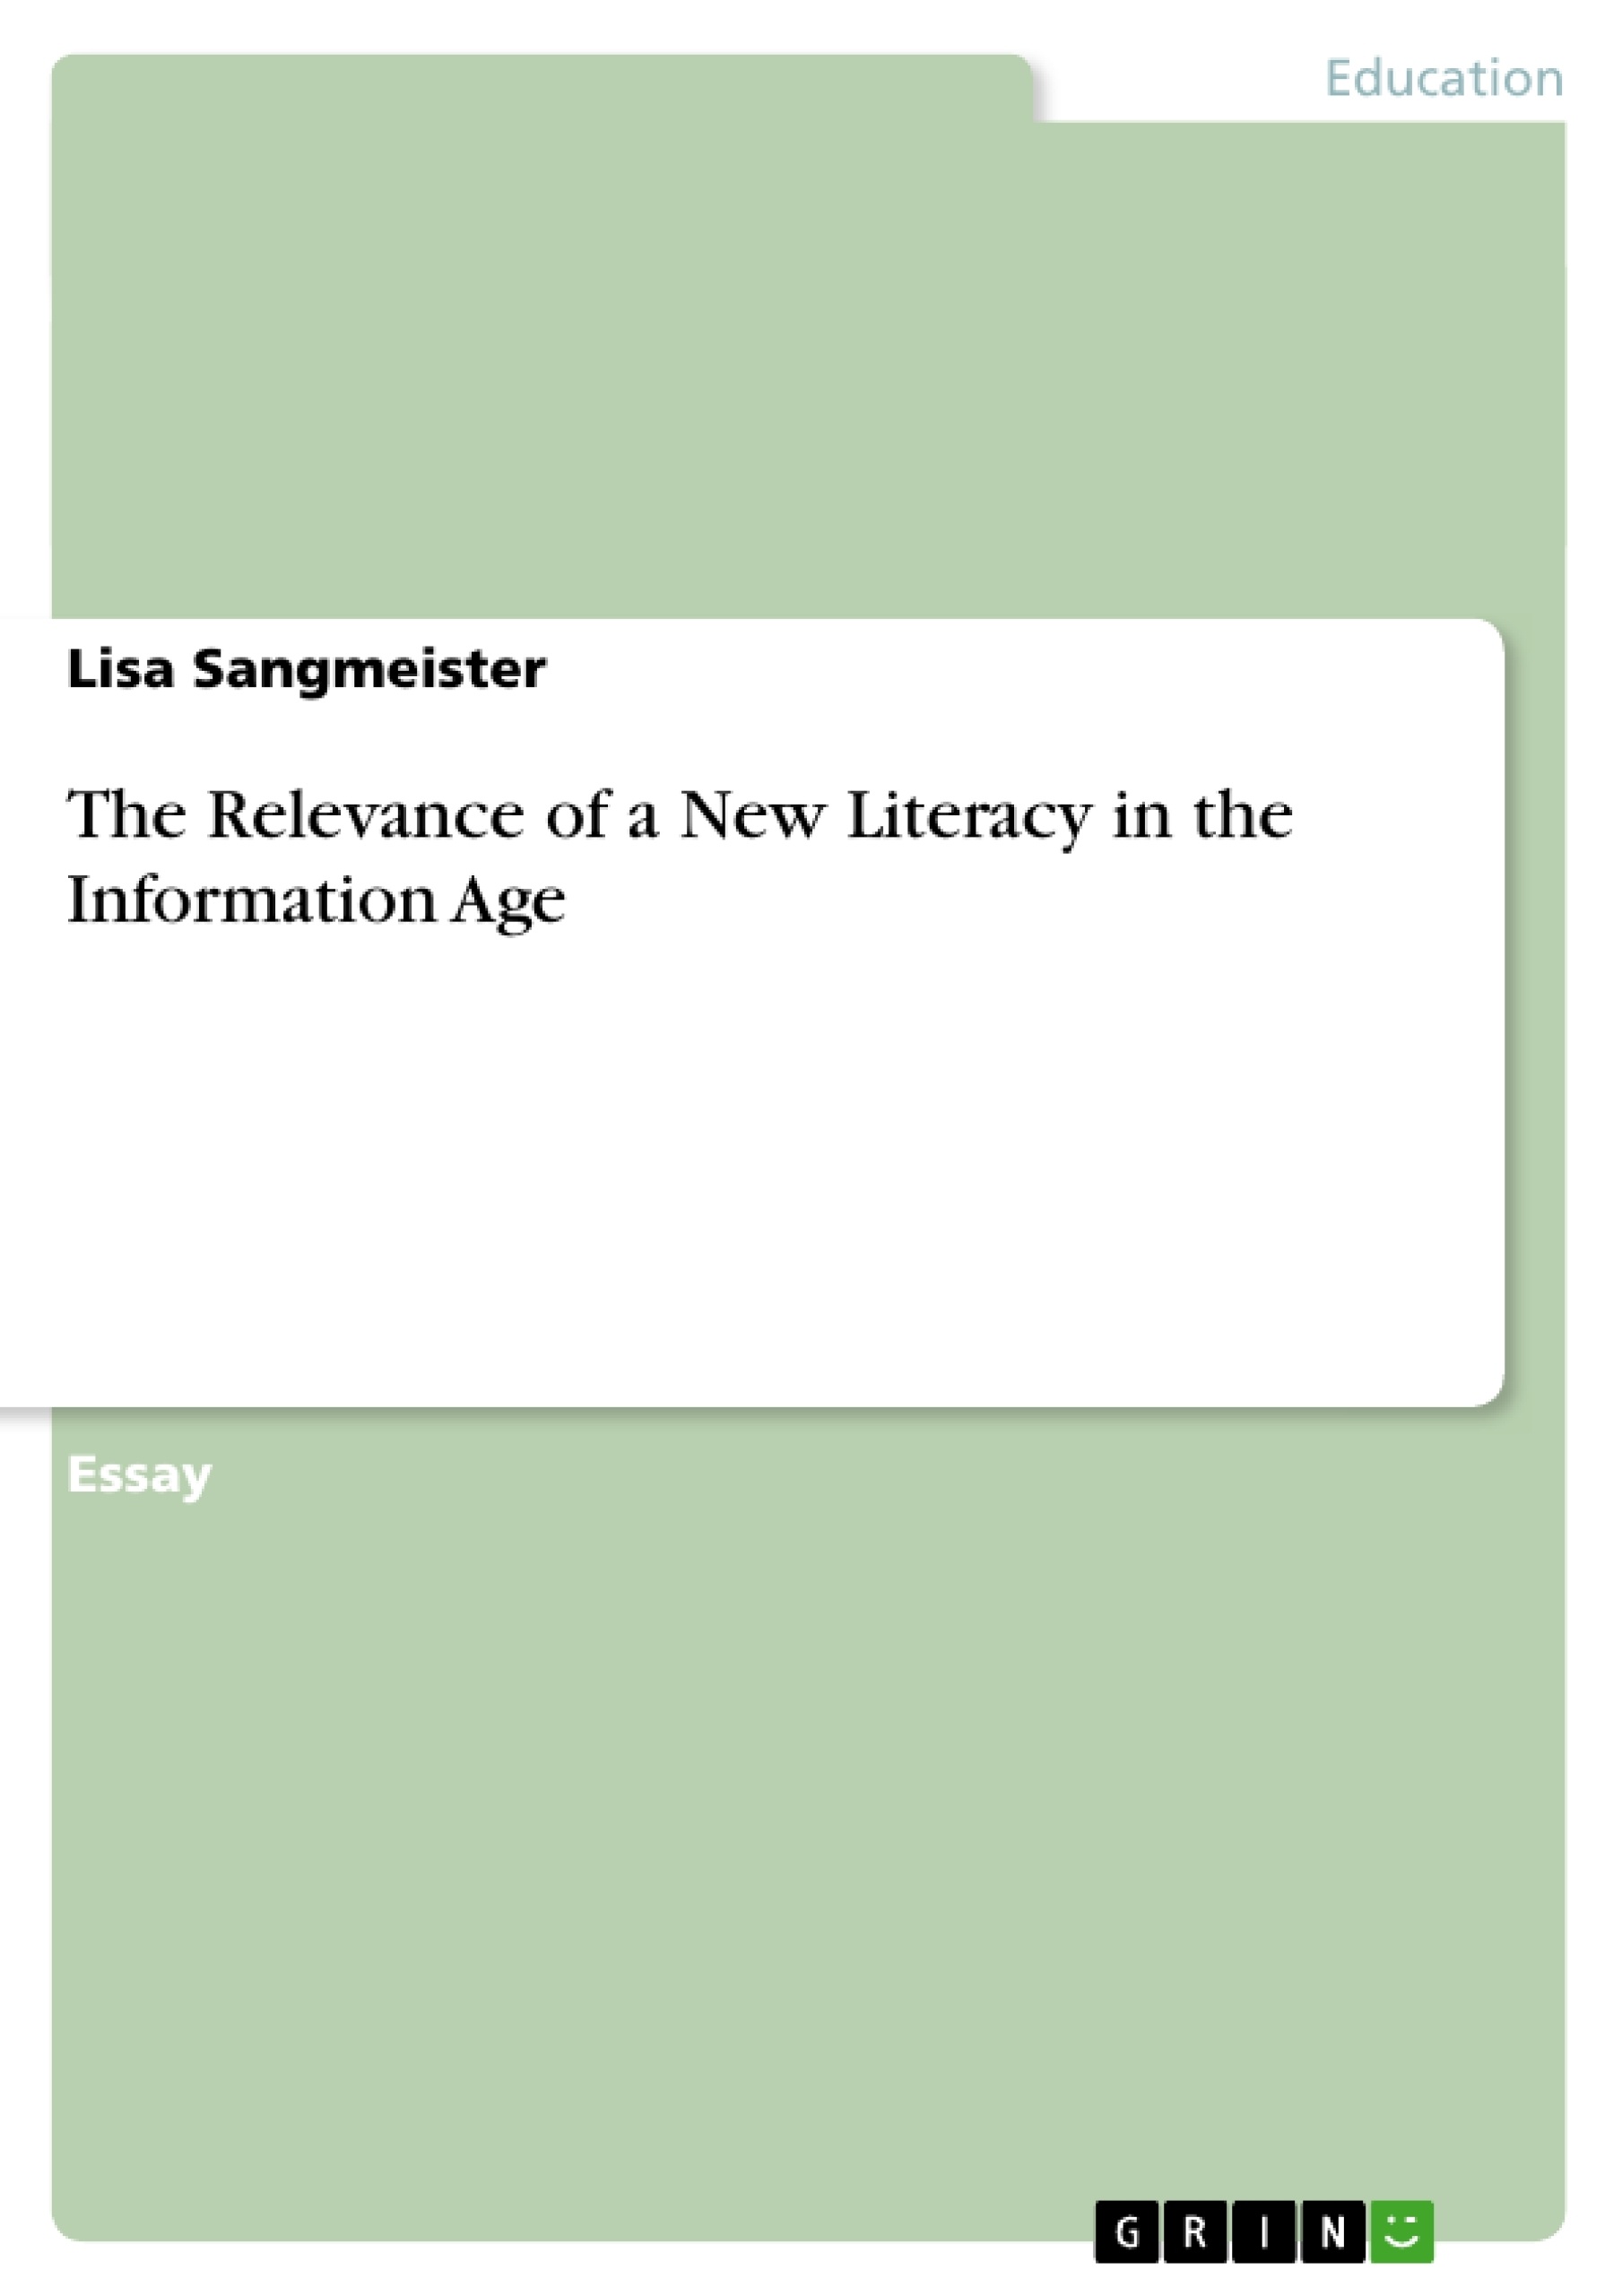 Title: The Relevance of a New Literacy in the Information Age